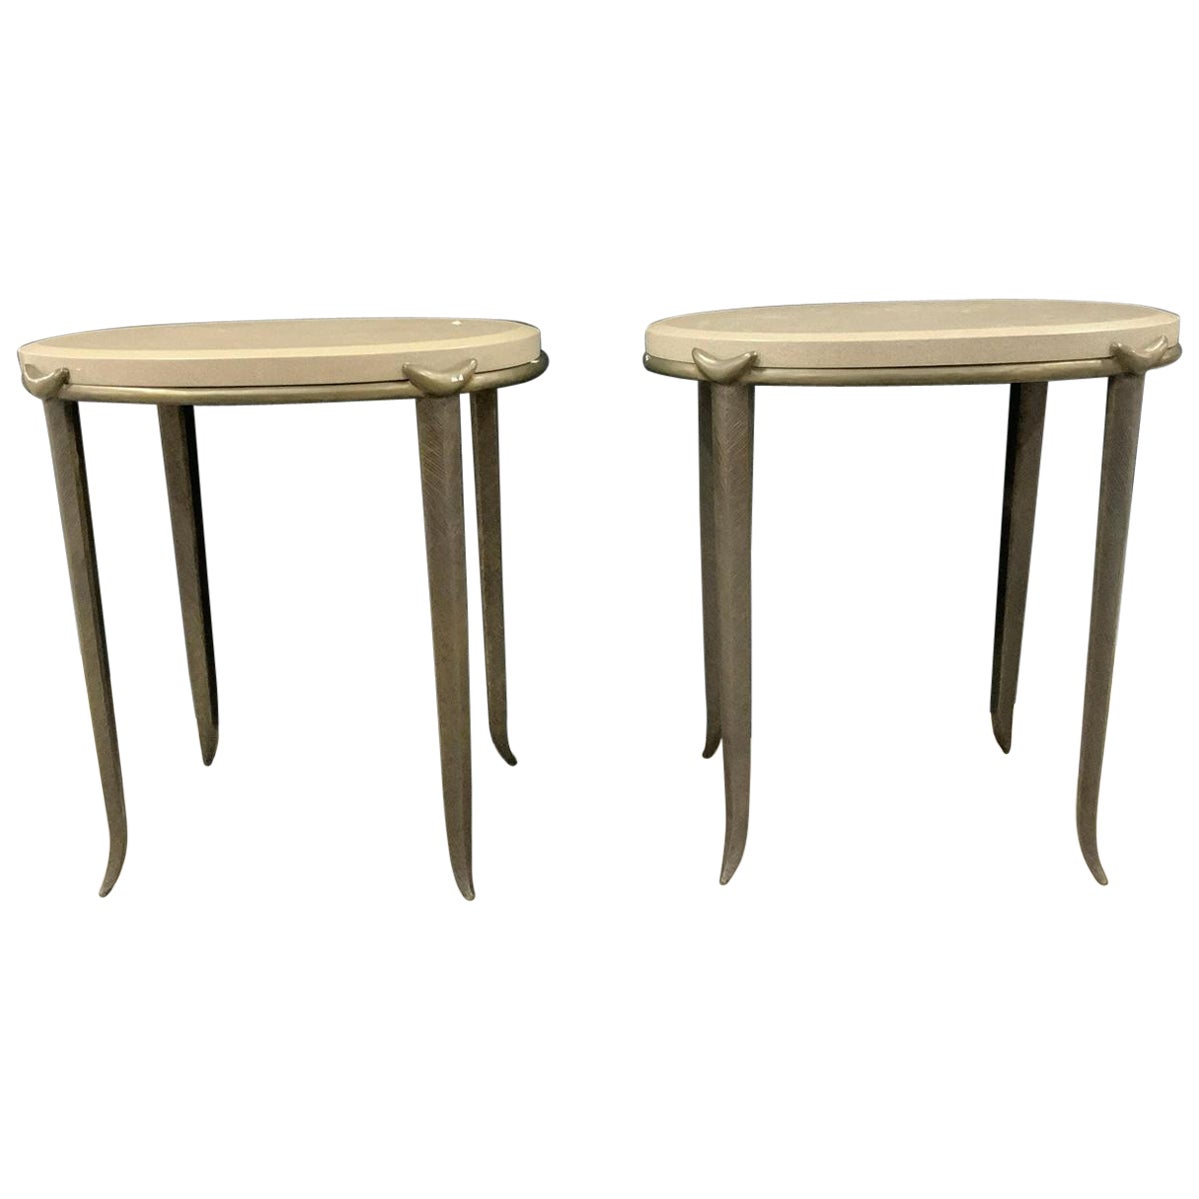 Pair of 27” Tall Bronze and Indiana Limestone Tables By Tom Corbin. 